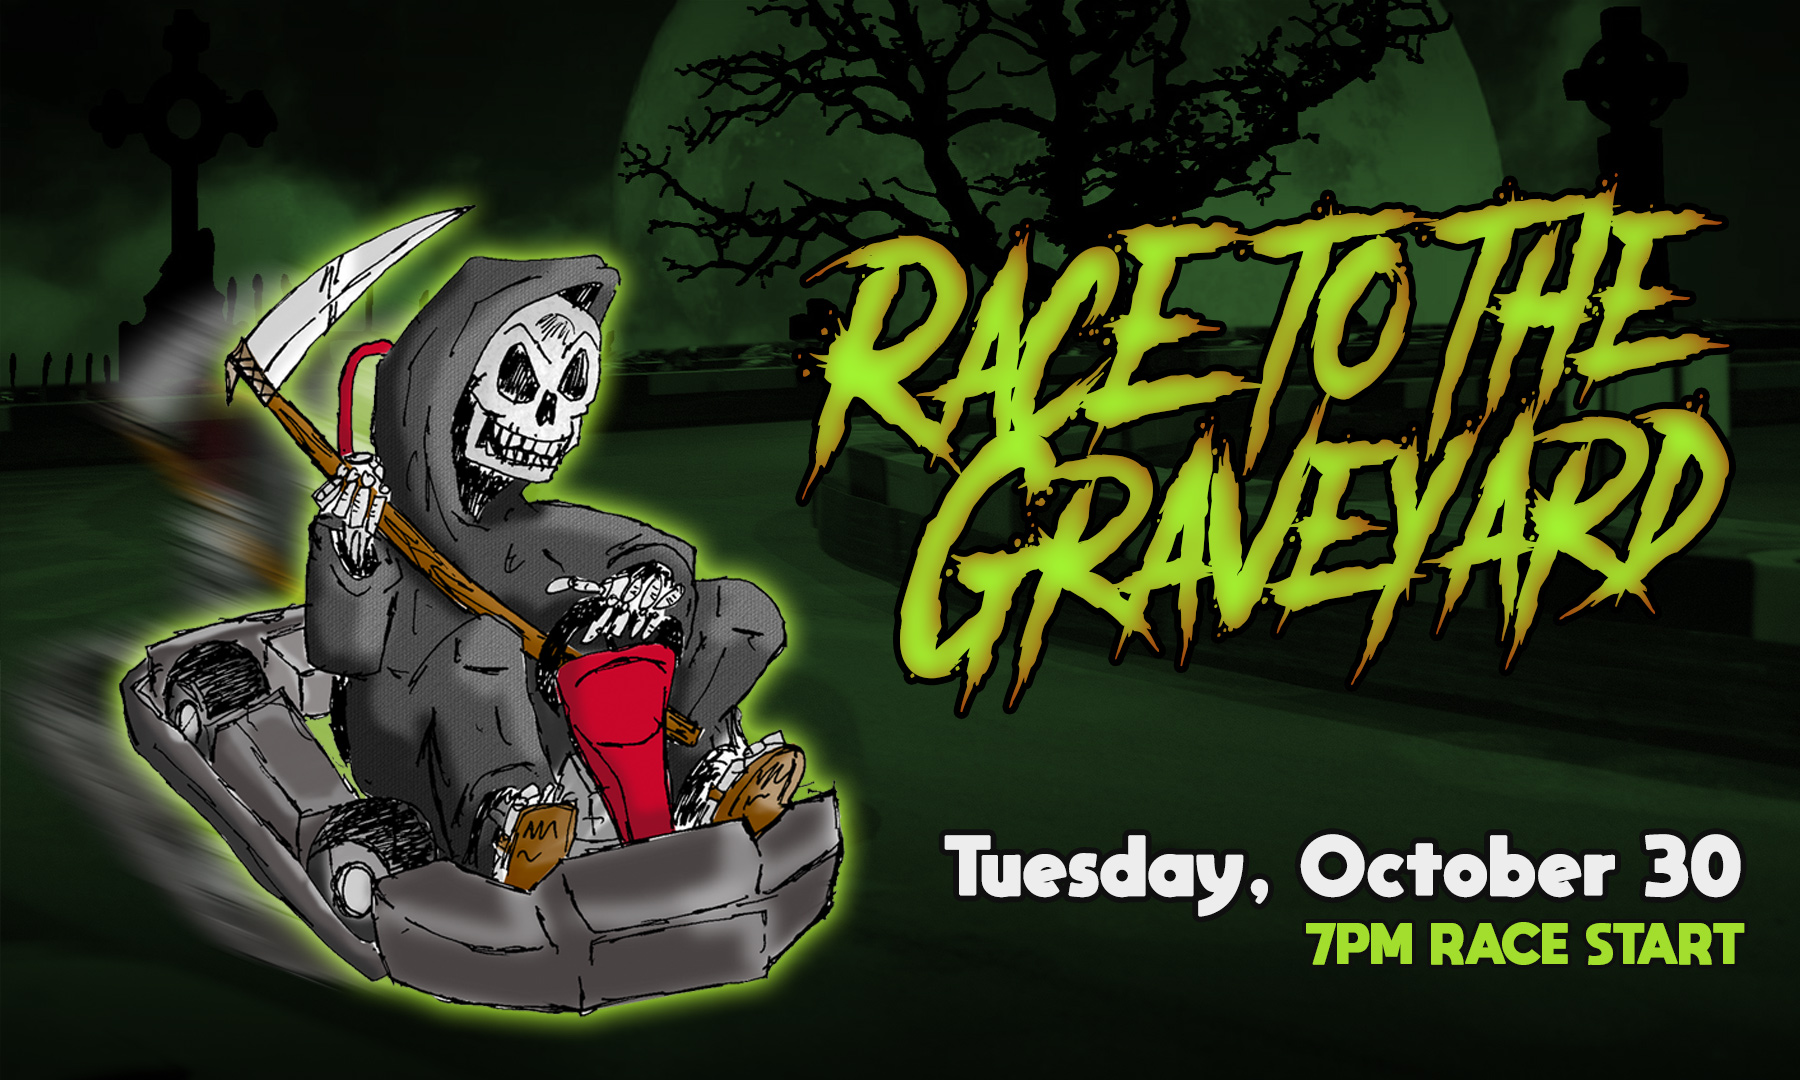 Race to the Graveyard 2018